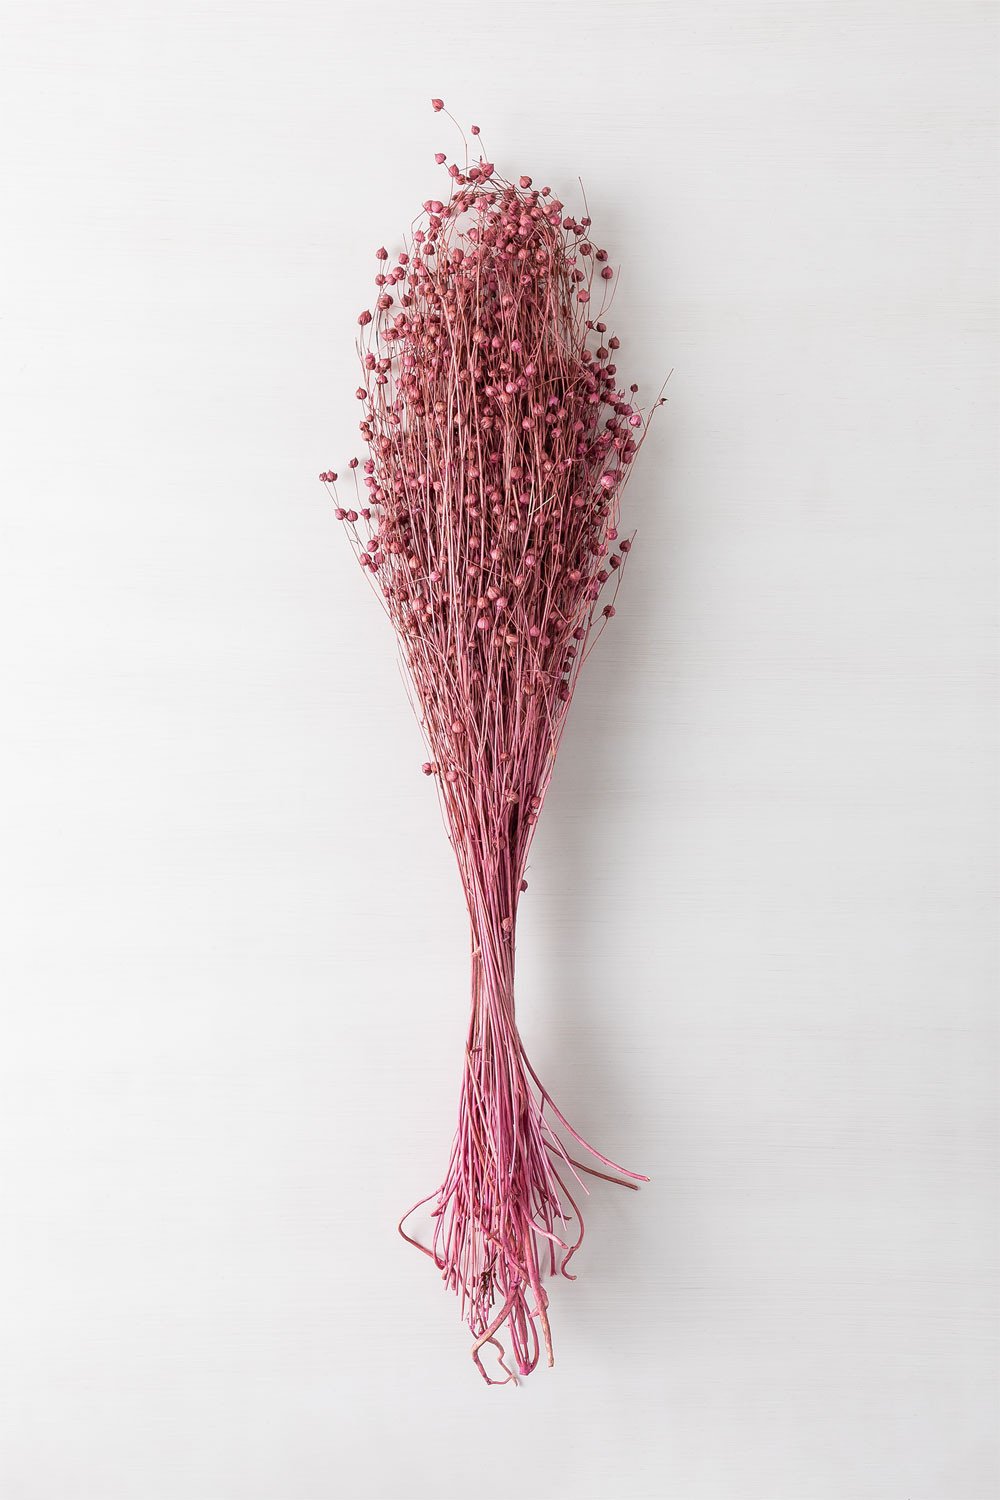 Bunch of Bairad Decorative Dried Flowers, gallery image 2